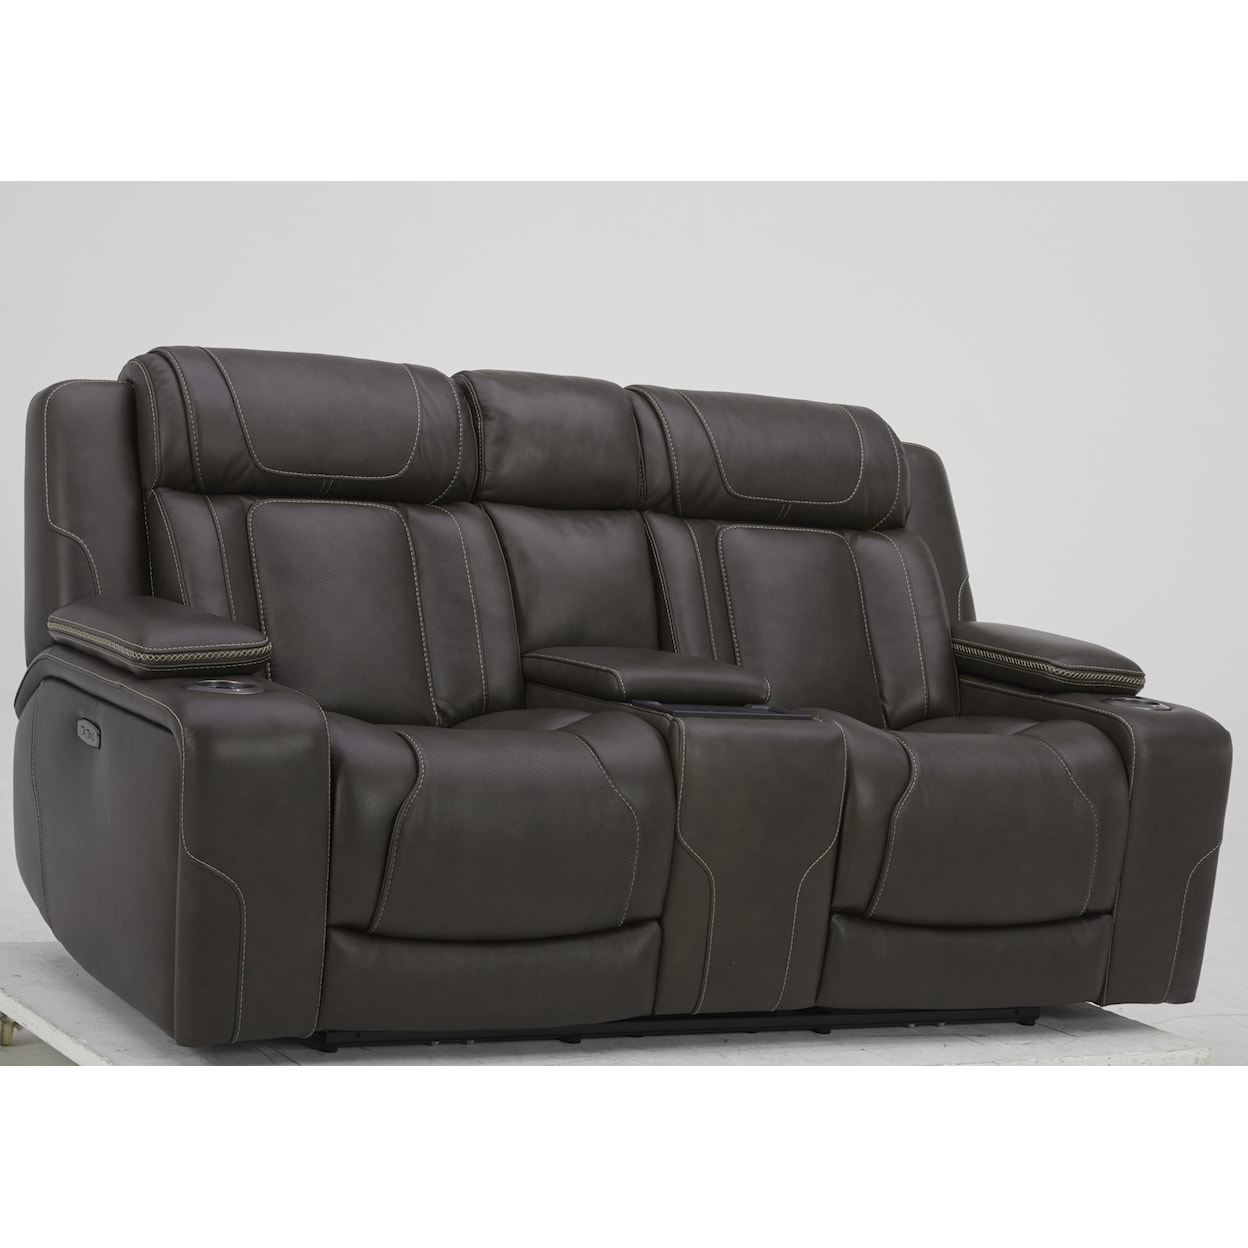 Kuka Home 615 Transformer Leather Collection 6153 Charcoal Dual Power Loveseat